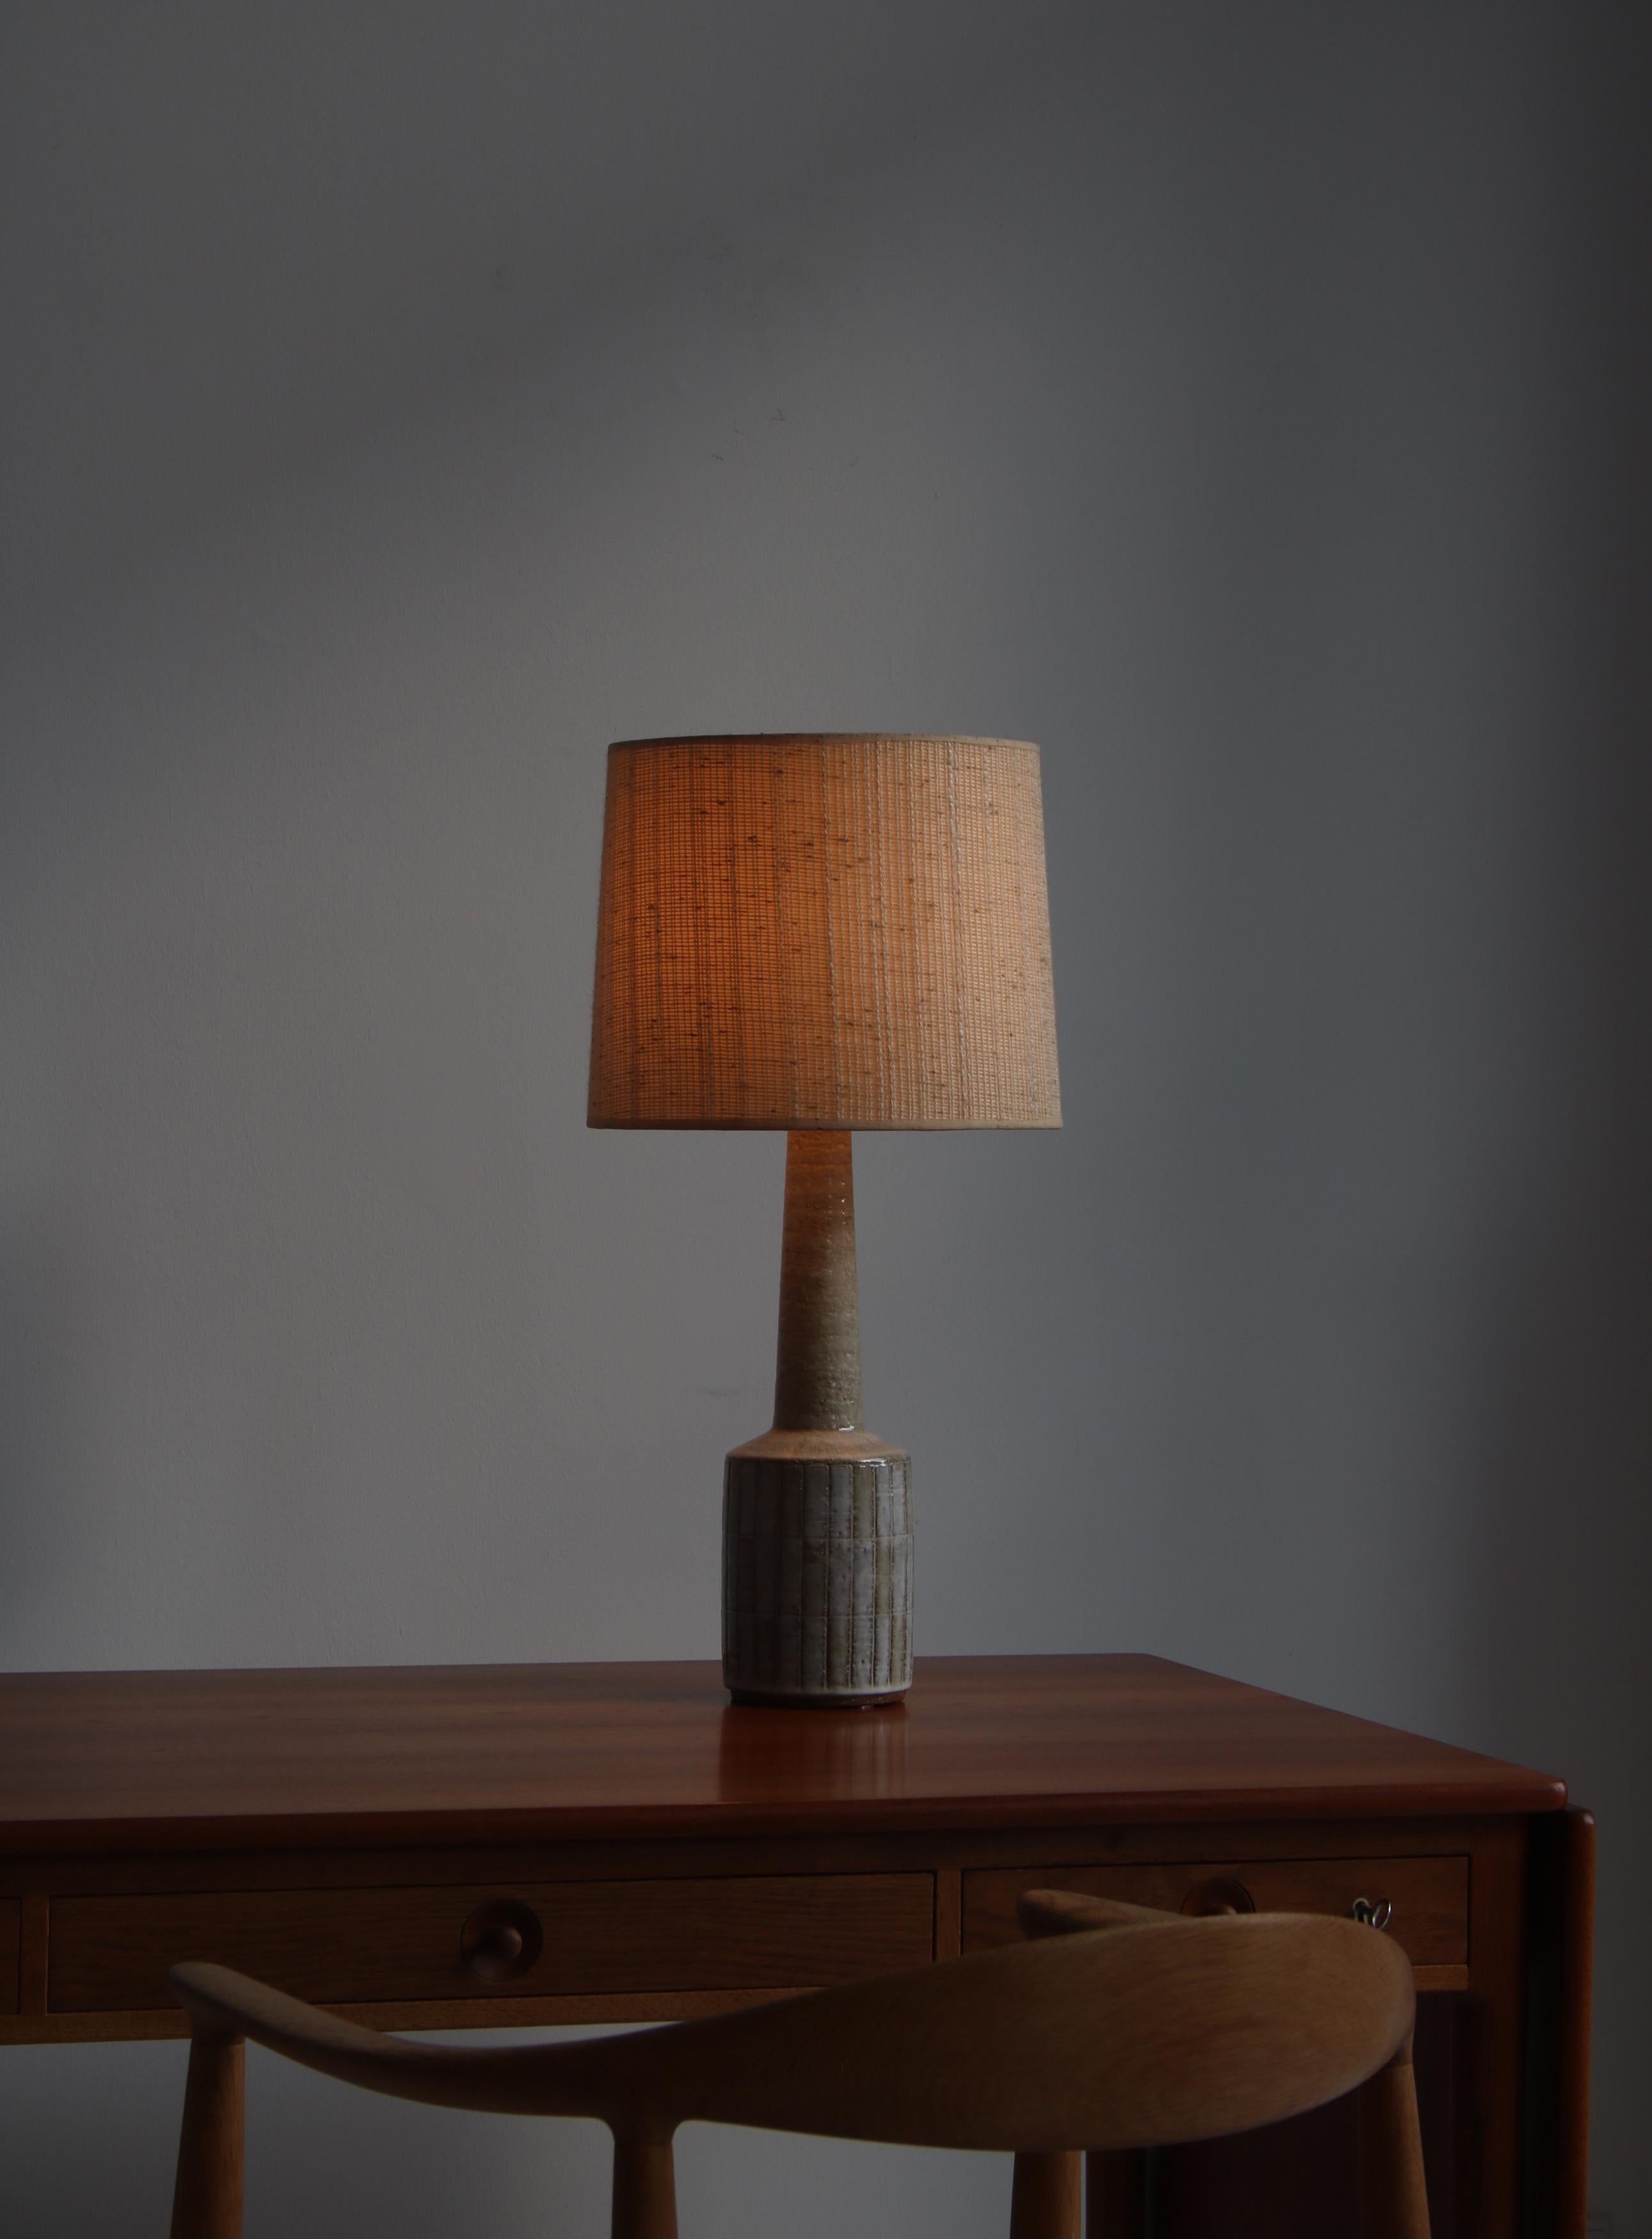 Beautiful large chamotte stoneware table lamp in grey glazing by Per Linneman-Schmidt for Palshus, Denmark. Made in the 1960s. Marked underneath by maker.
Shown with both the original linen shade and a new flax linen shade.

Original shade: